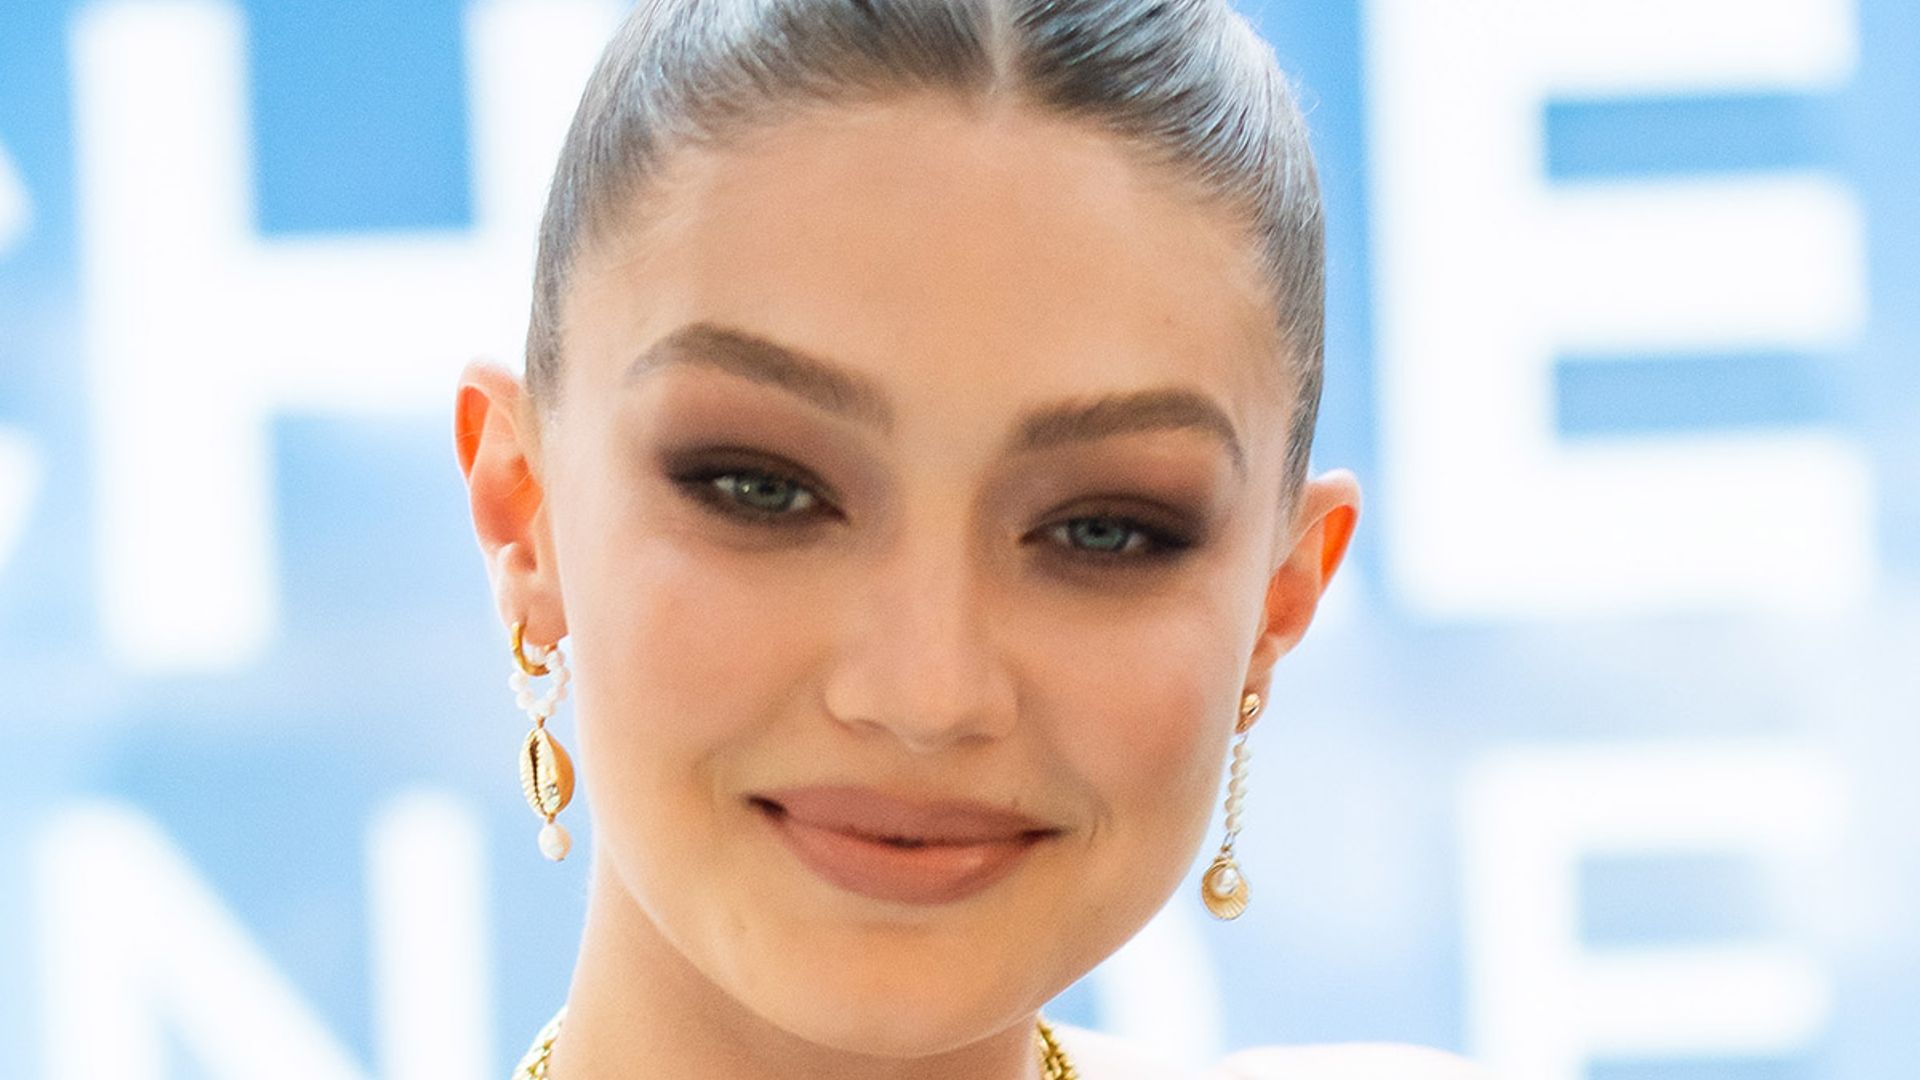 Gigi Hadid leaves her apartment and heads to 'The Tonight Show